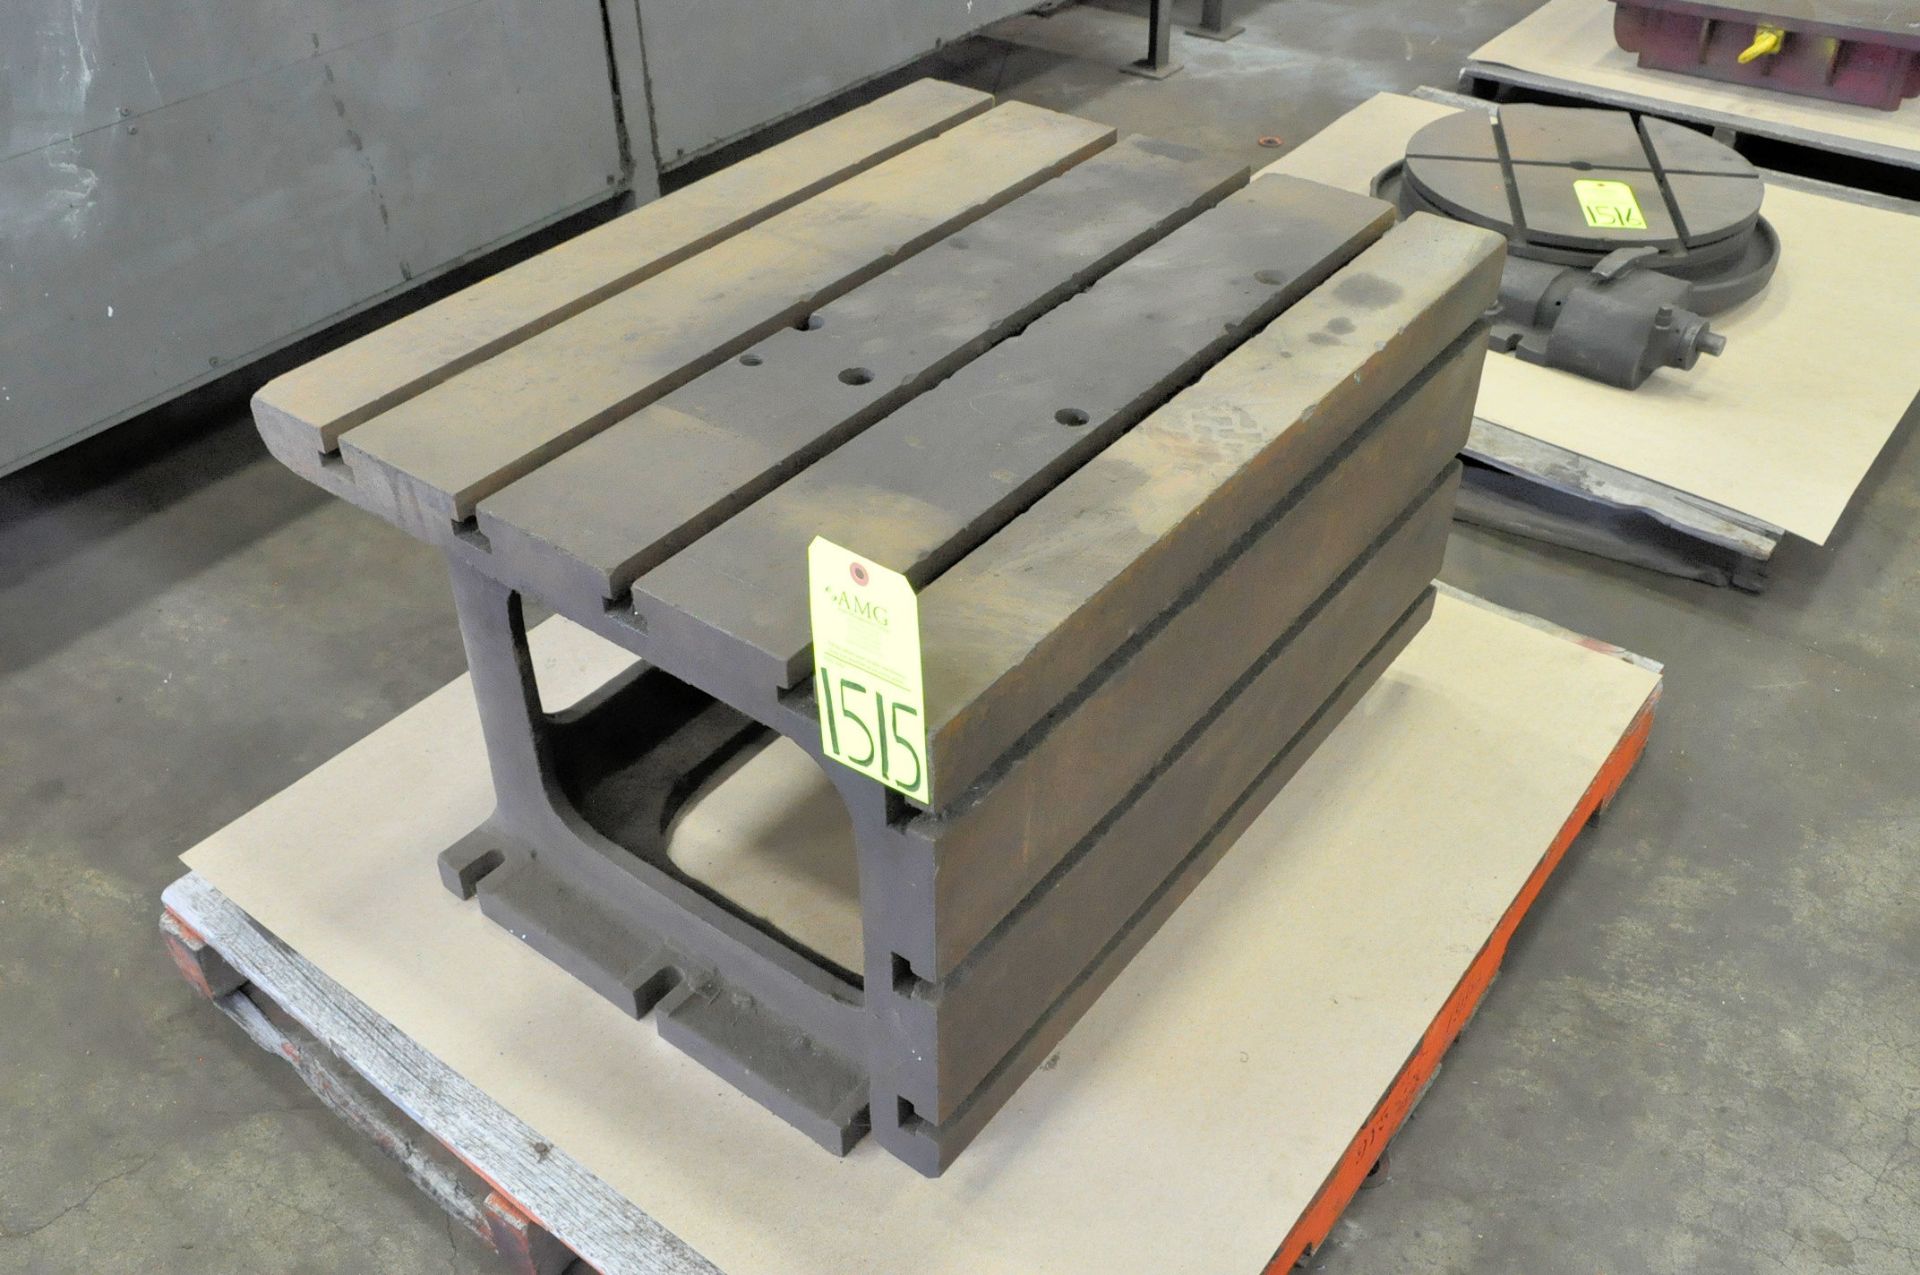 26" x 33" x 20" T-Slotted Box Table on (1) Pallet, (F-18), (Yellow Tag)